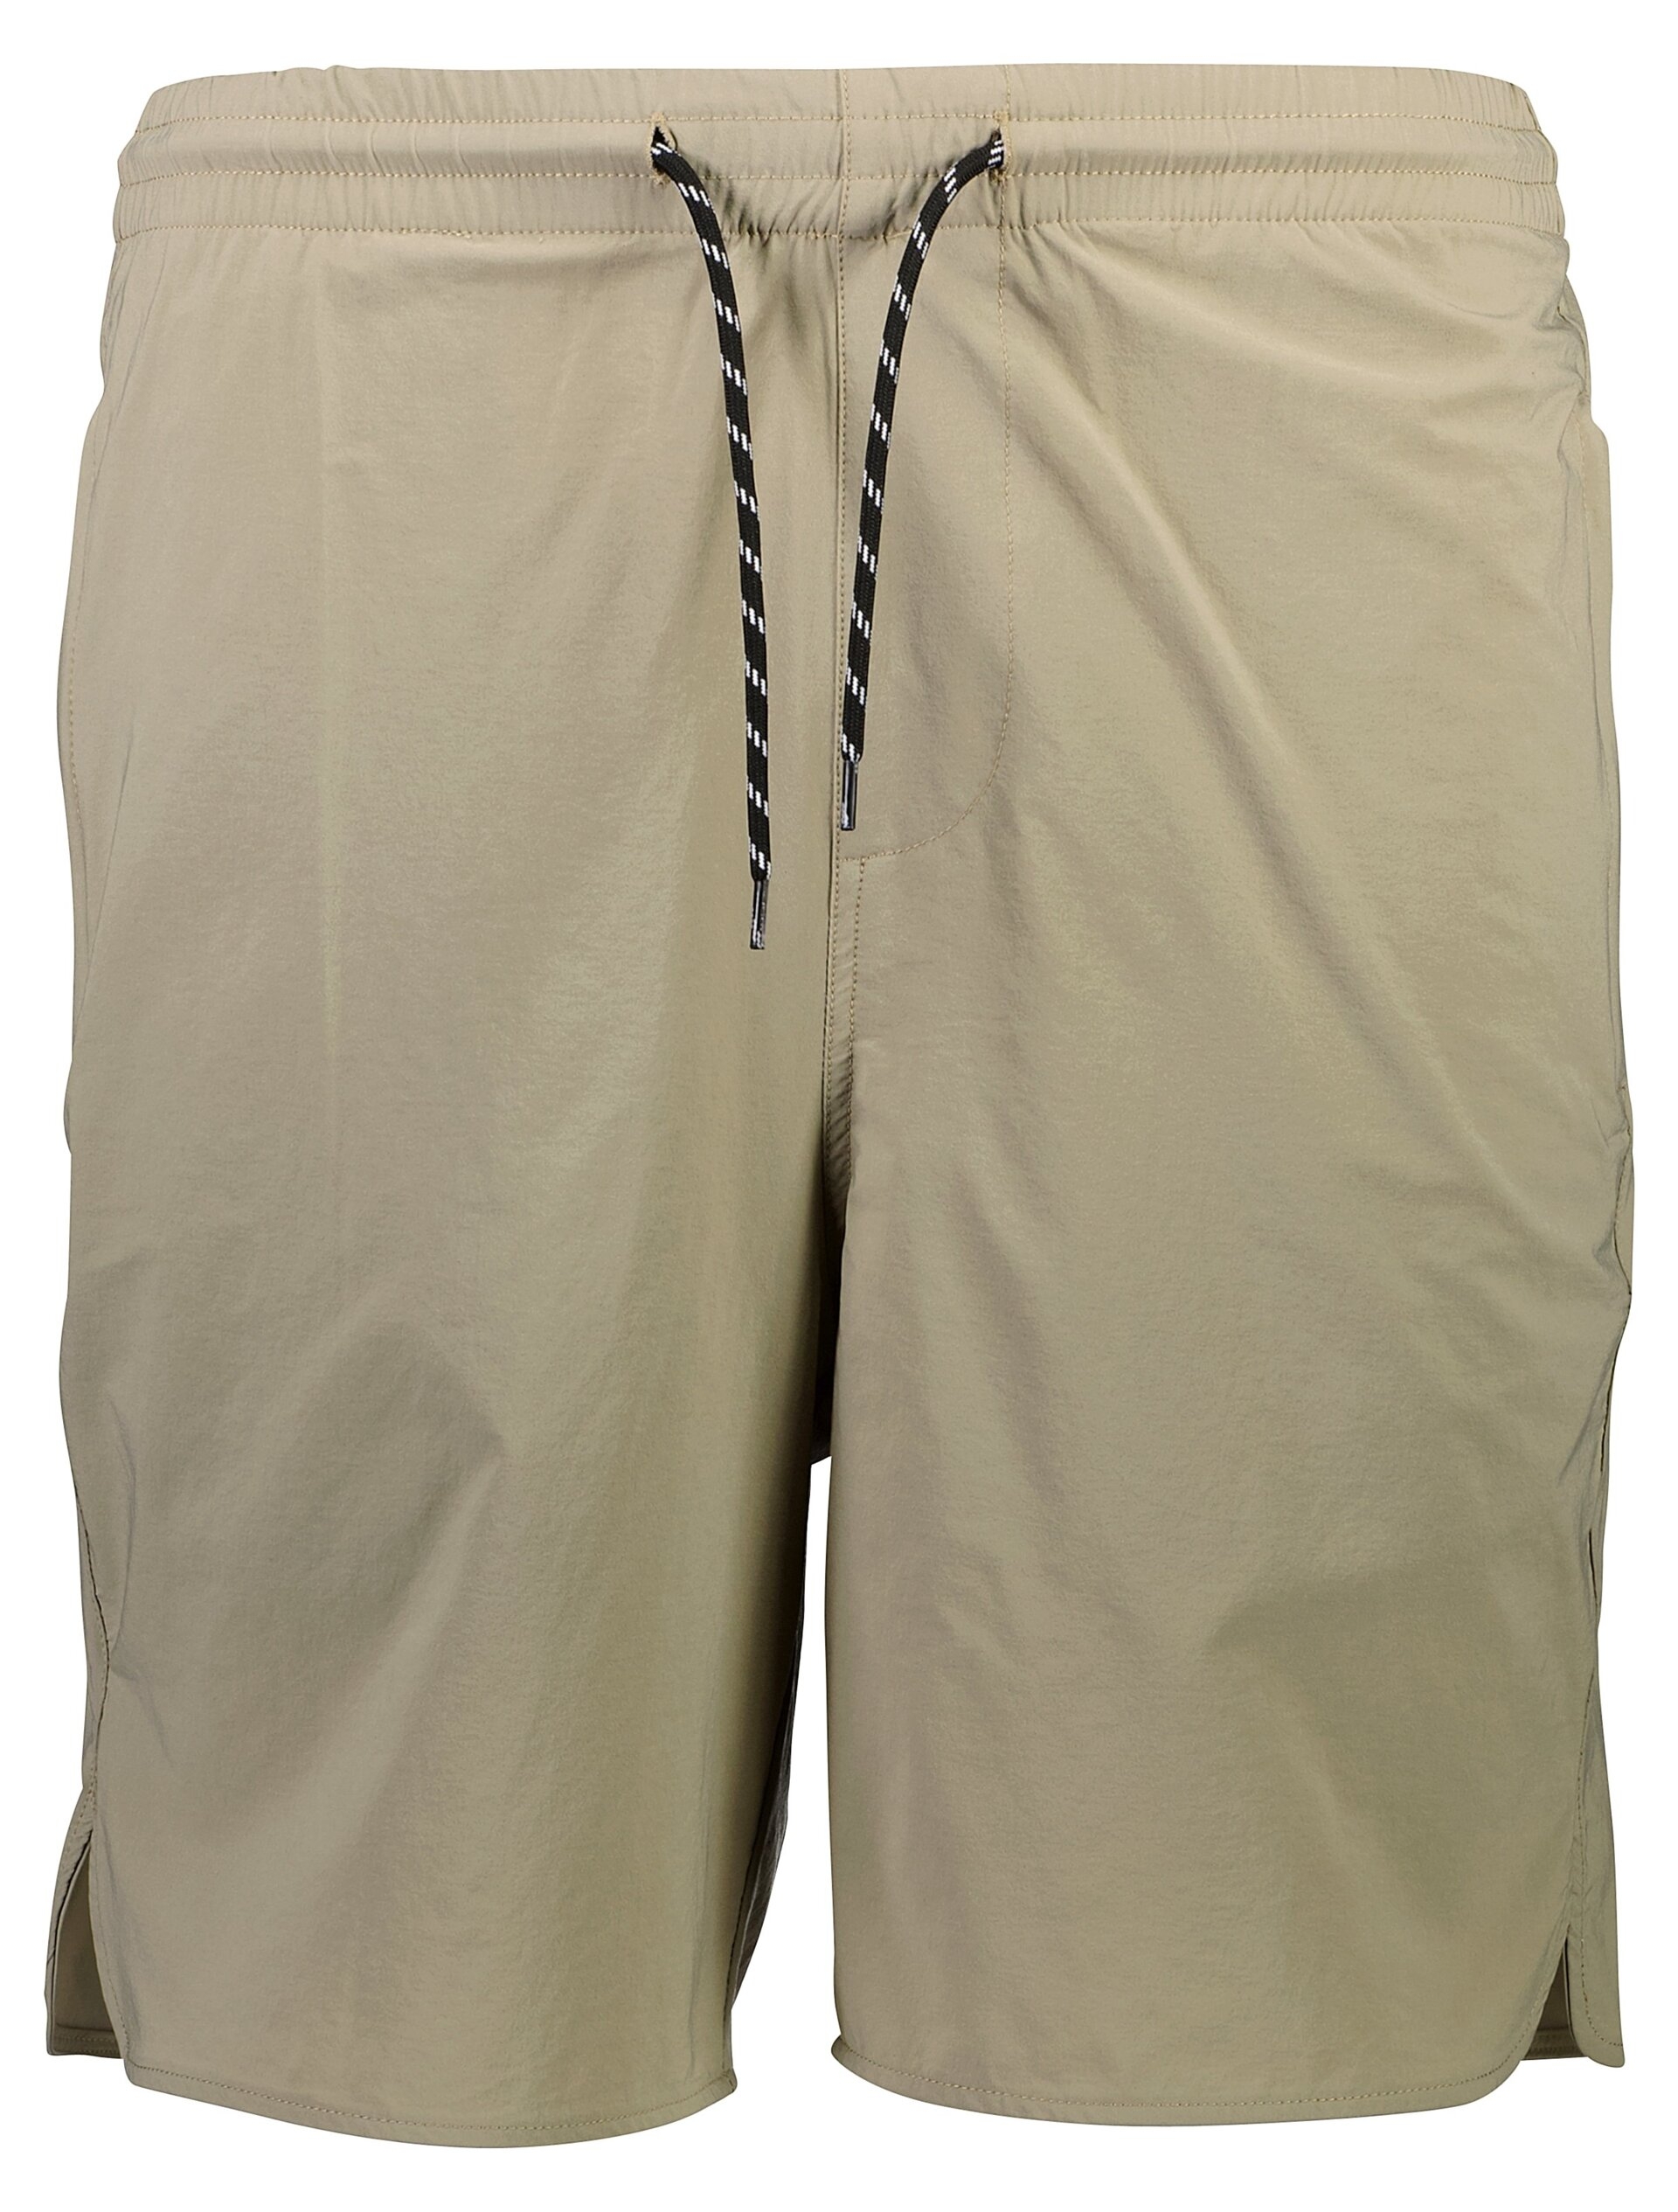 Lindbergh Casual shorts brown / mid stone